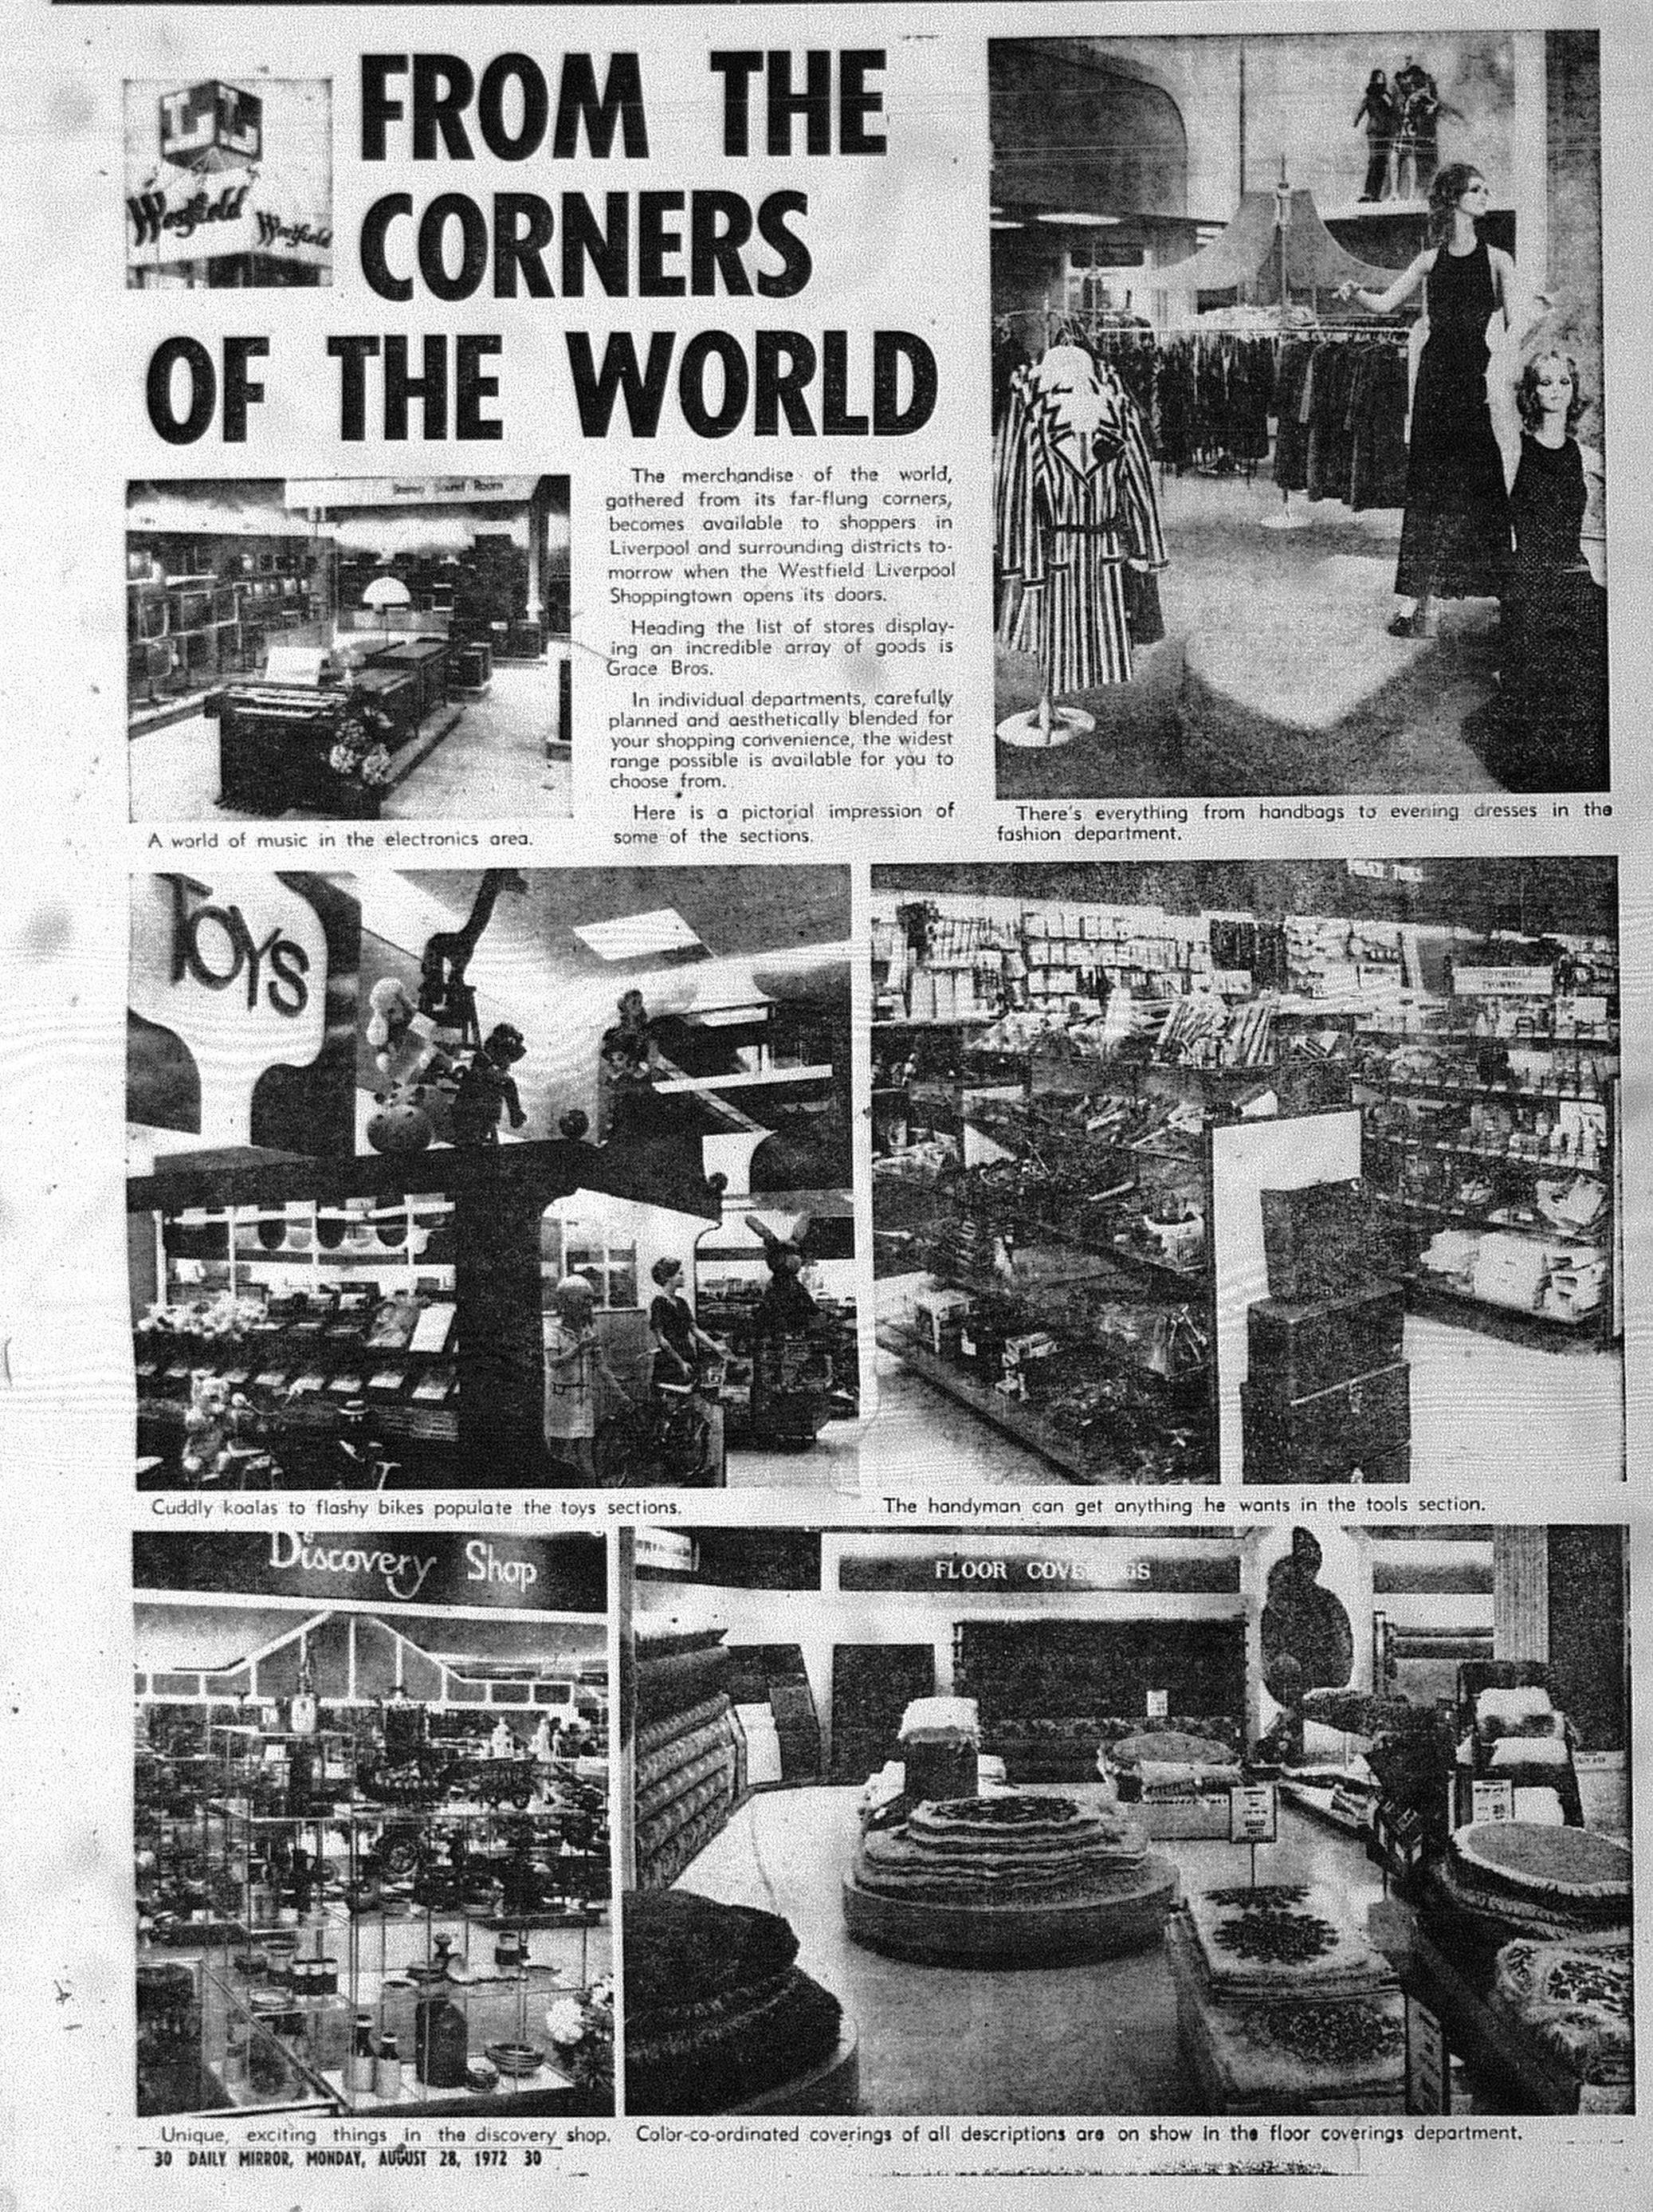 Westfield Liverpool Opening August 28 1972 Daily Mirror (6)A